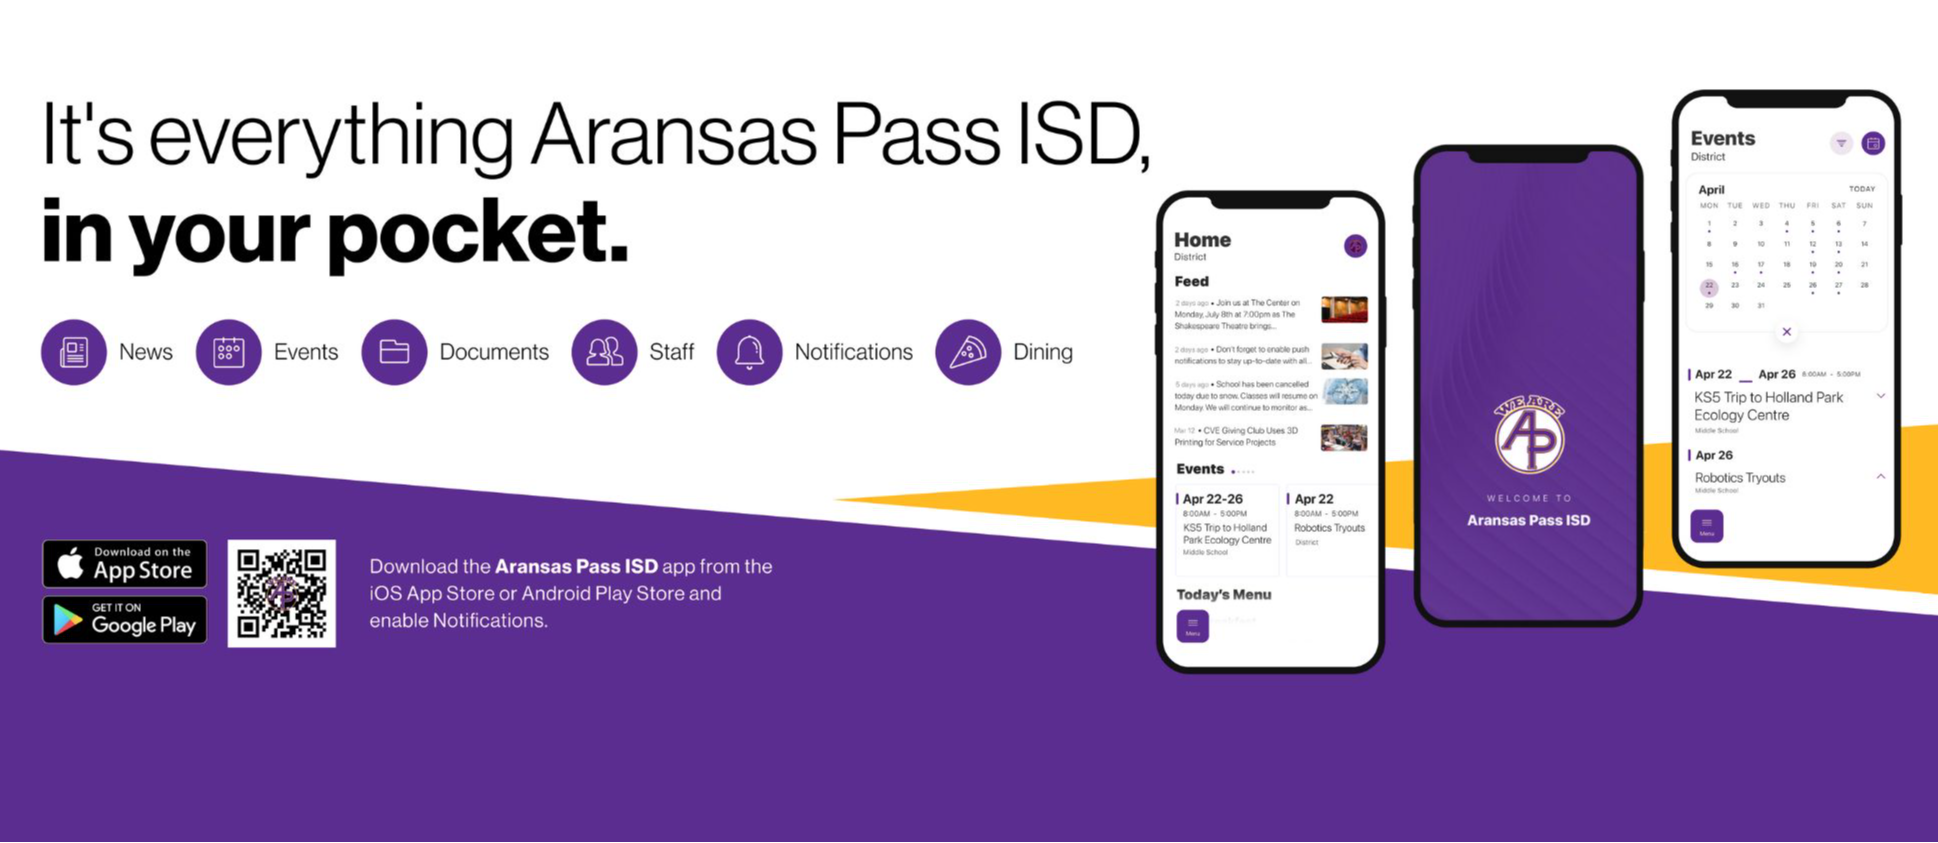 It's everything Aransas Pass ISD in your pocket. Download the Aransas Pass ISD app from the iOS App Store or the Android Play Store and enable Notifications.